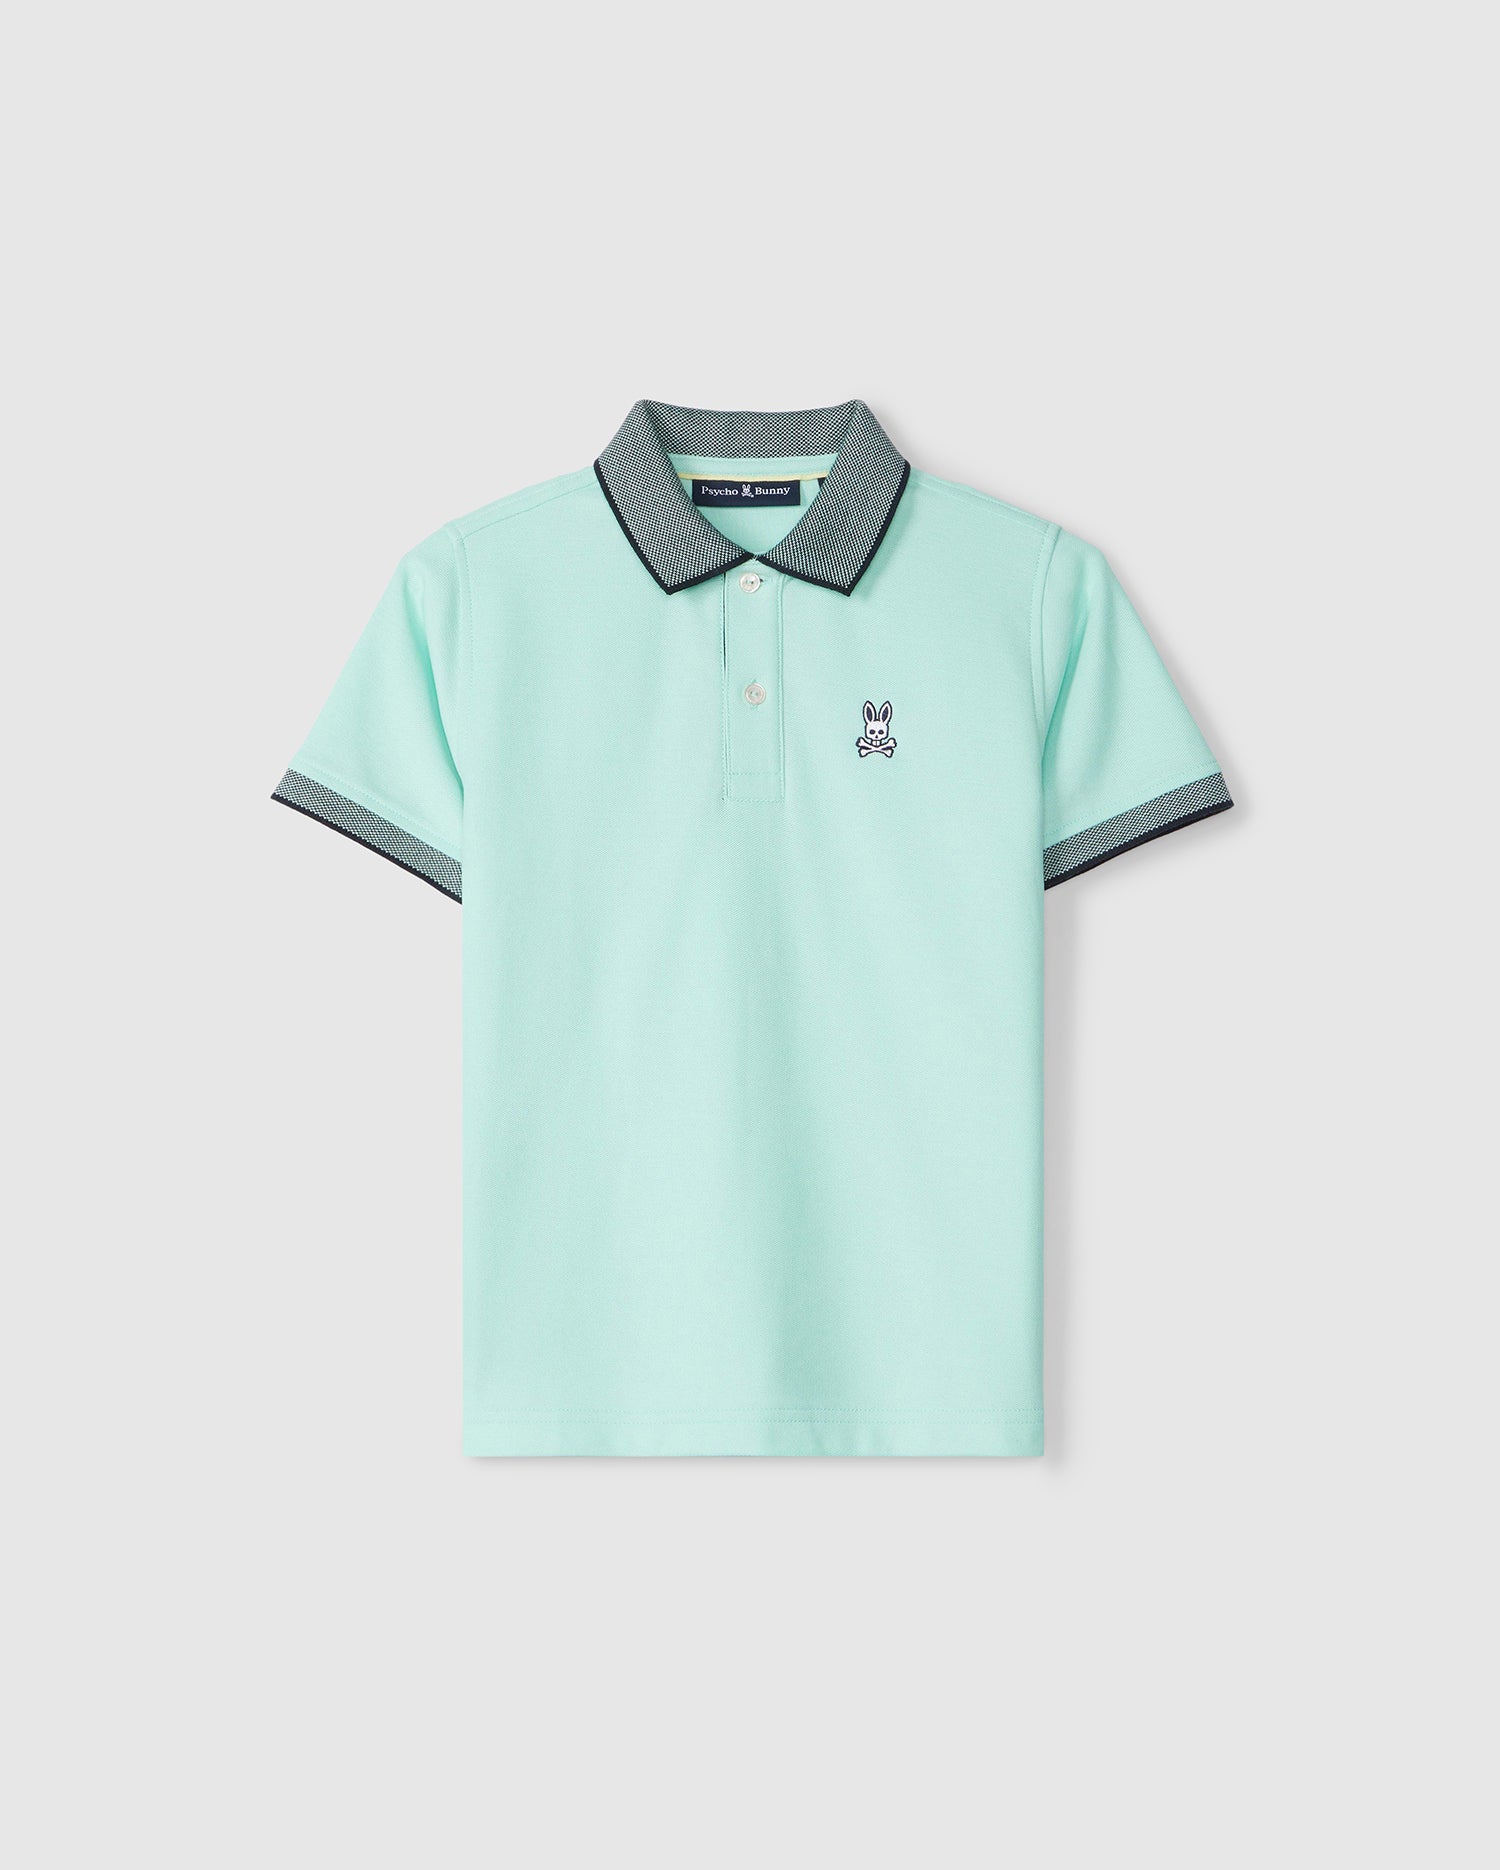 A light green Kids Southport Pique Polo Shirt with a small white bunny logo on the chest and grey accents on the collar and sleeves, displayed against a plain background by Psycho Bunny.